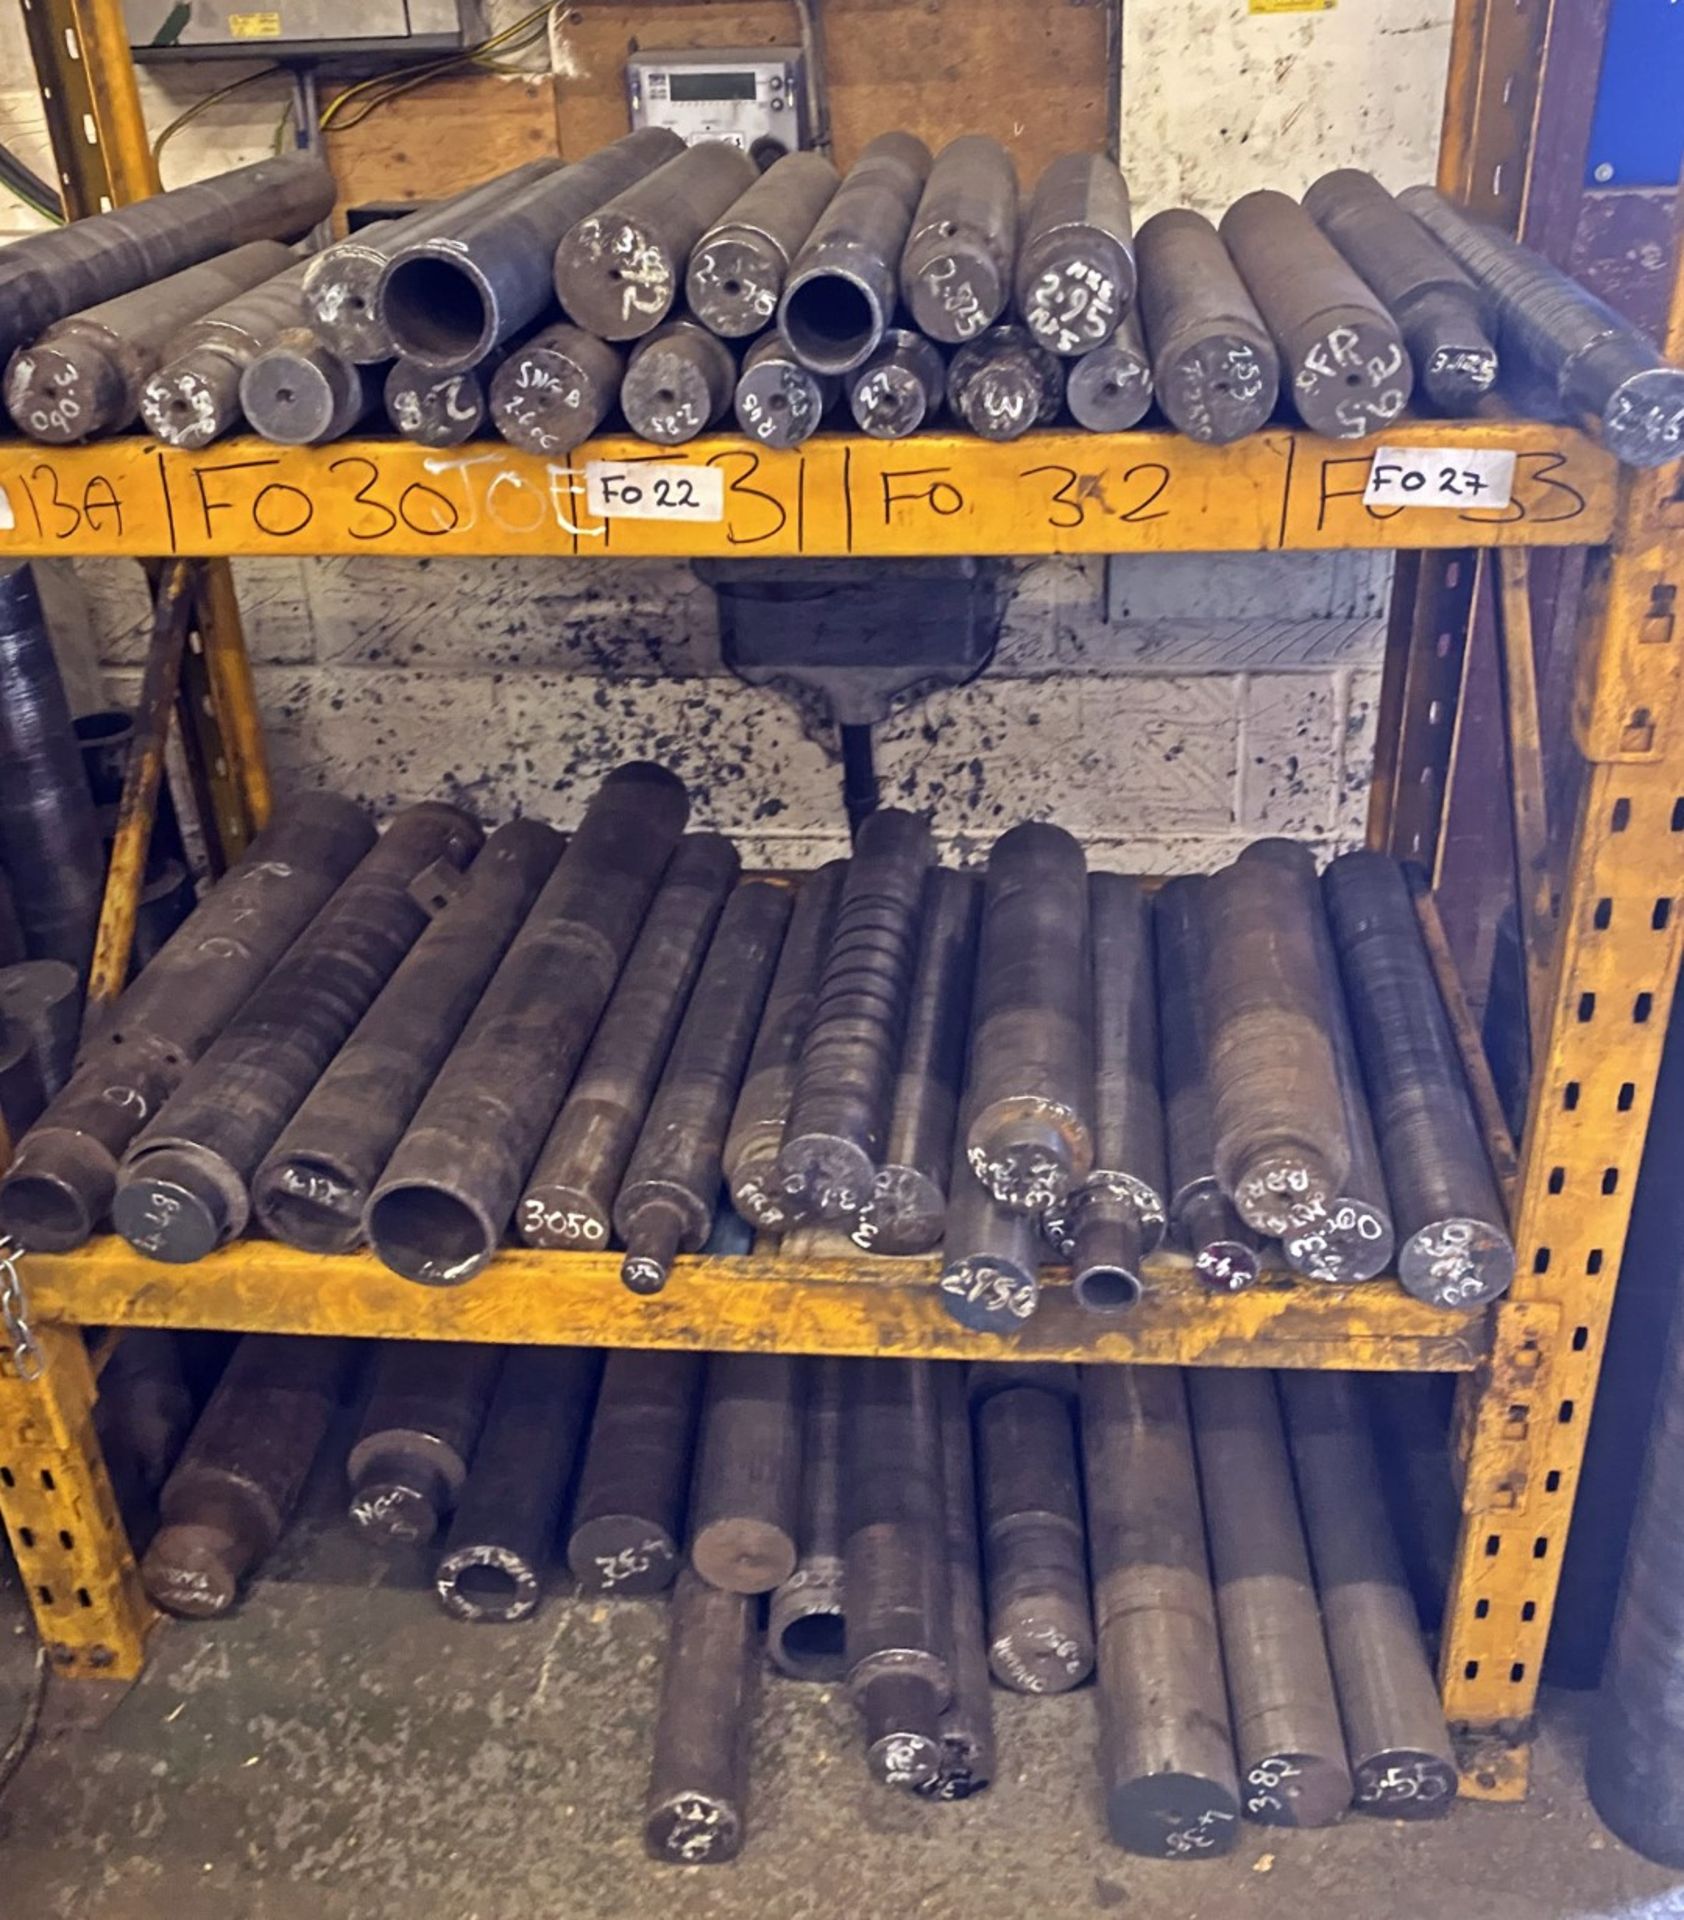 Approx 50 x Rollers For Forming Springs - Includes Storage Rack as Pictured